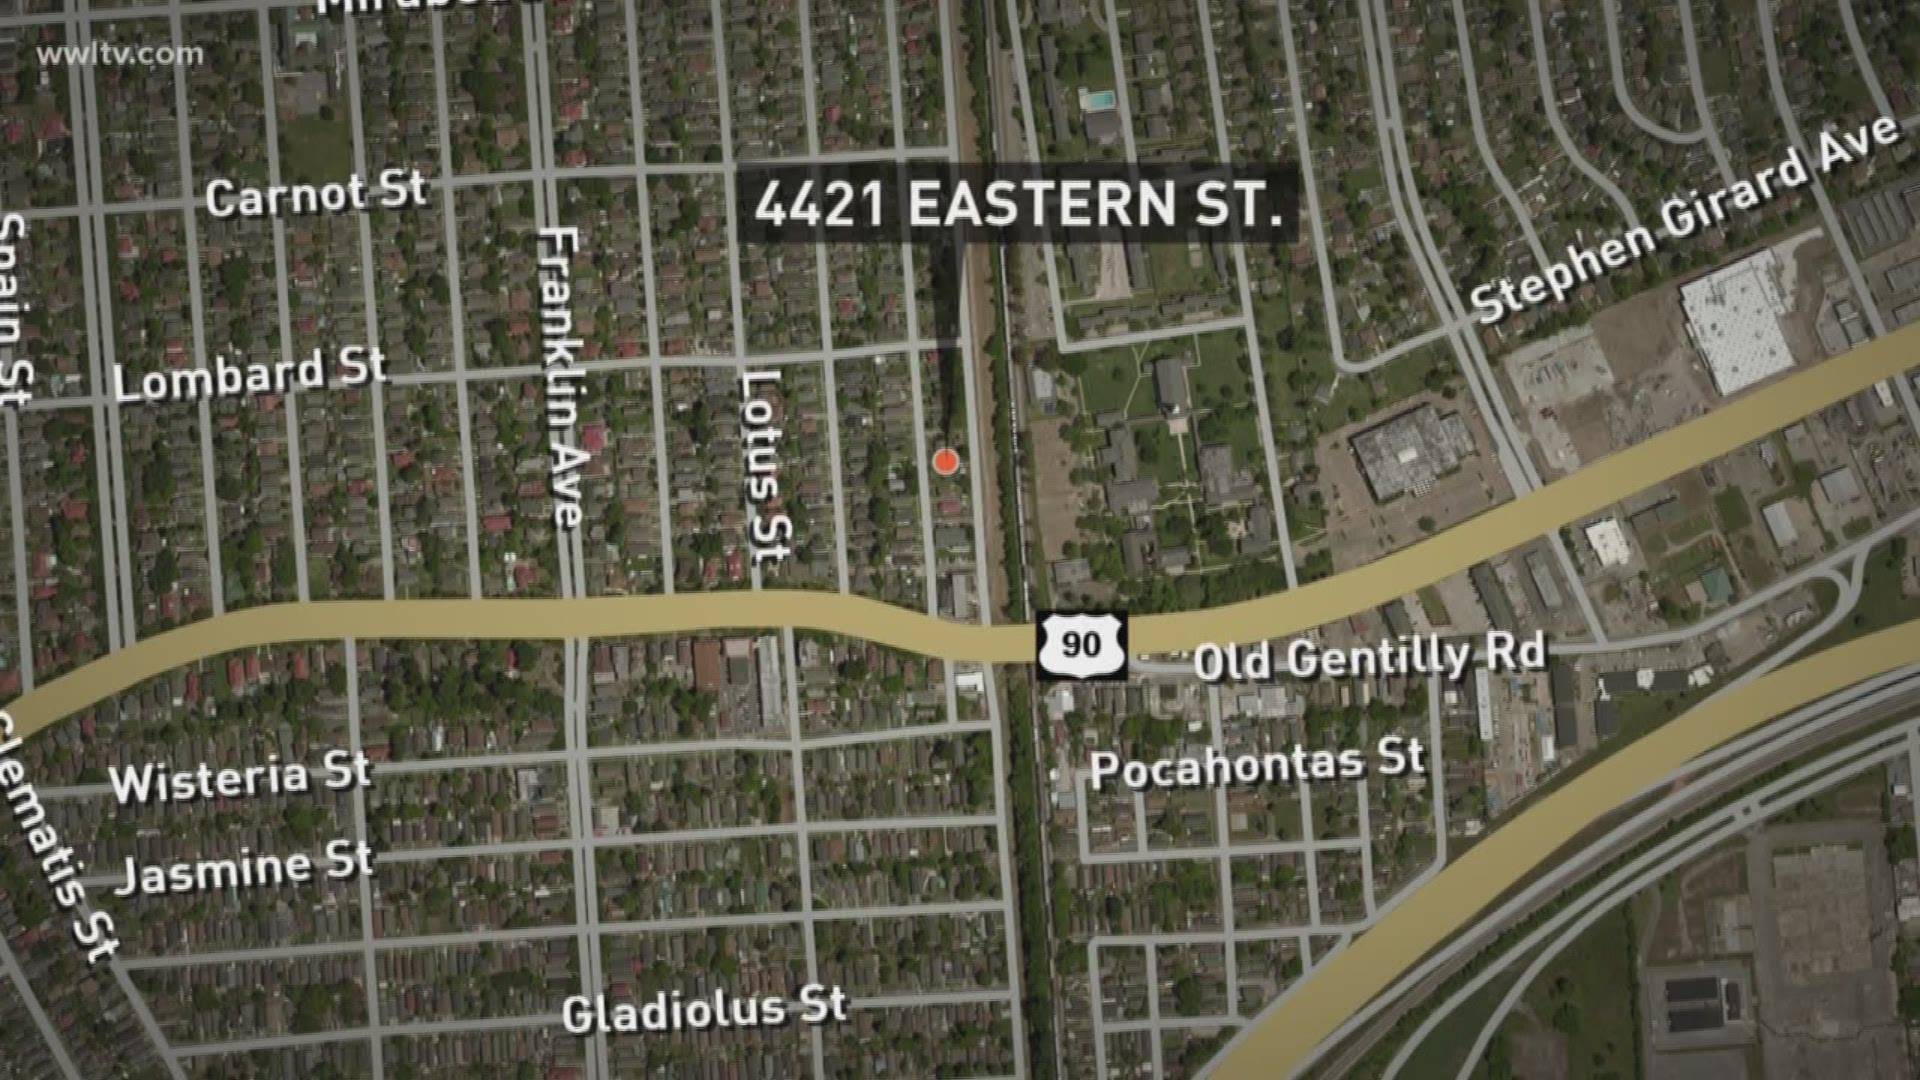 Firefighters received a call about a fire in the 4400 block of Eastern Street just after 11:45 p.m. Sunday.